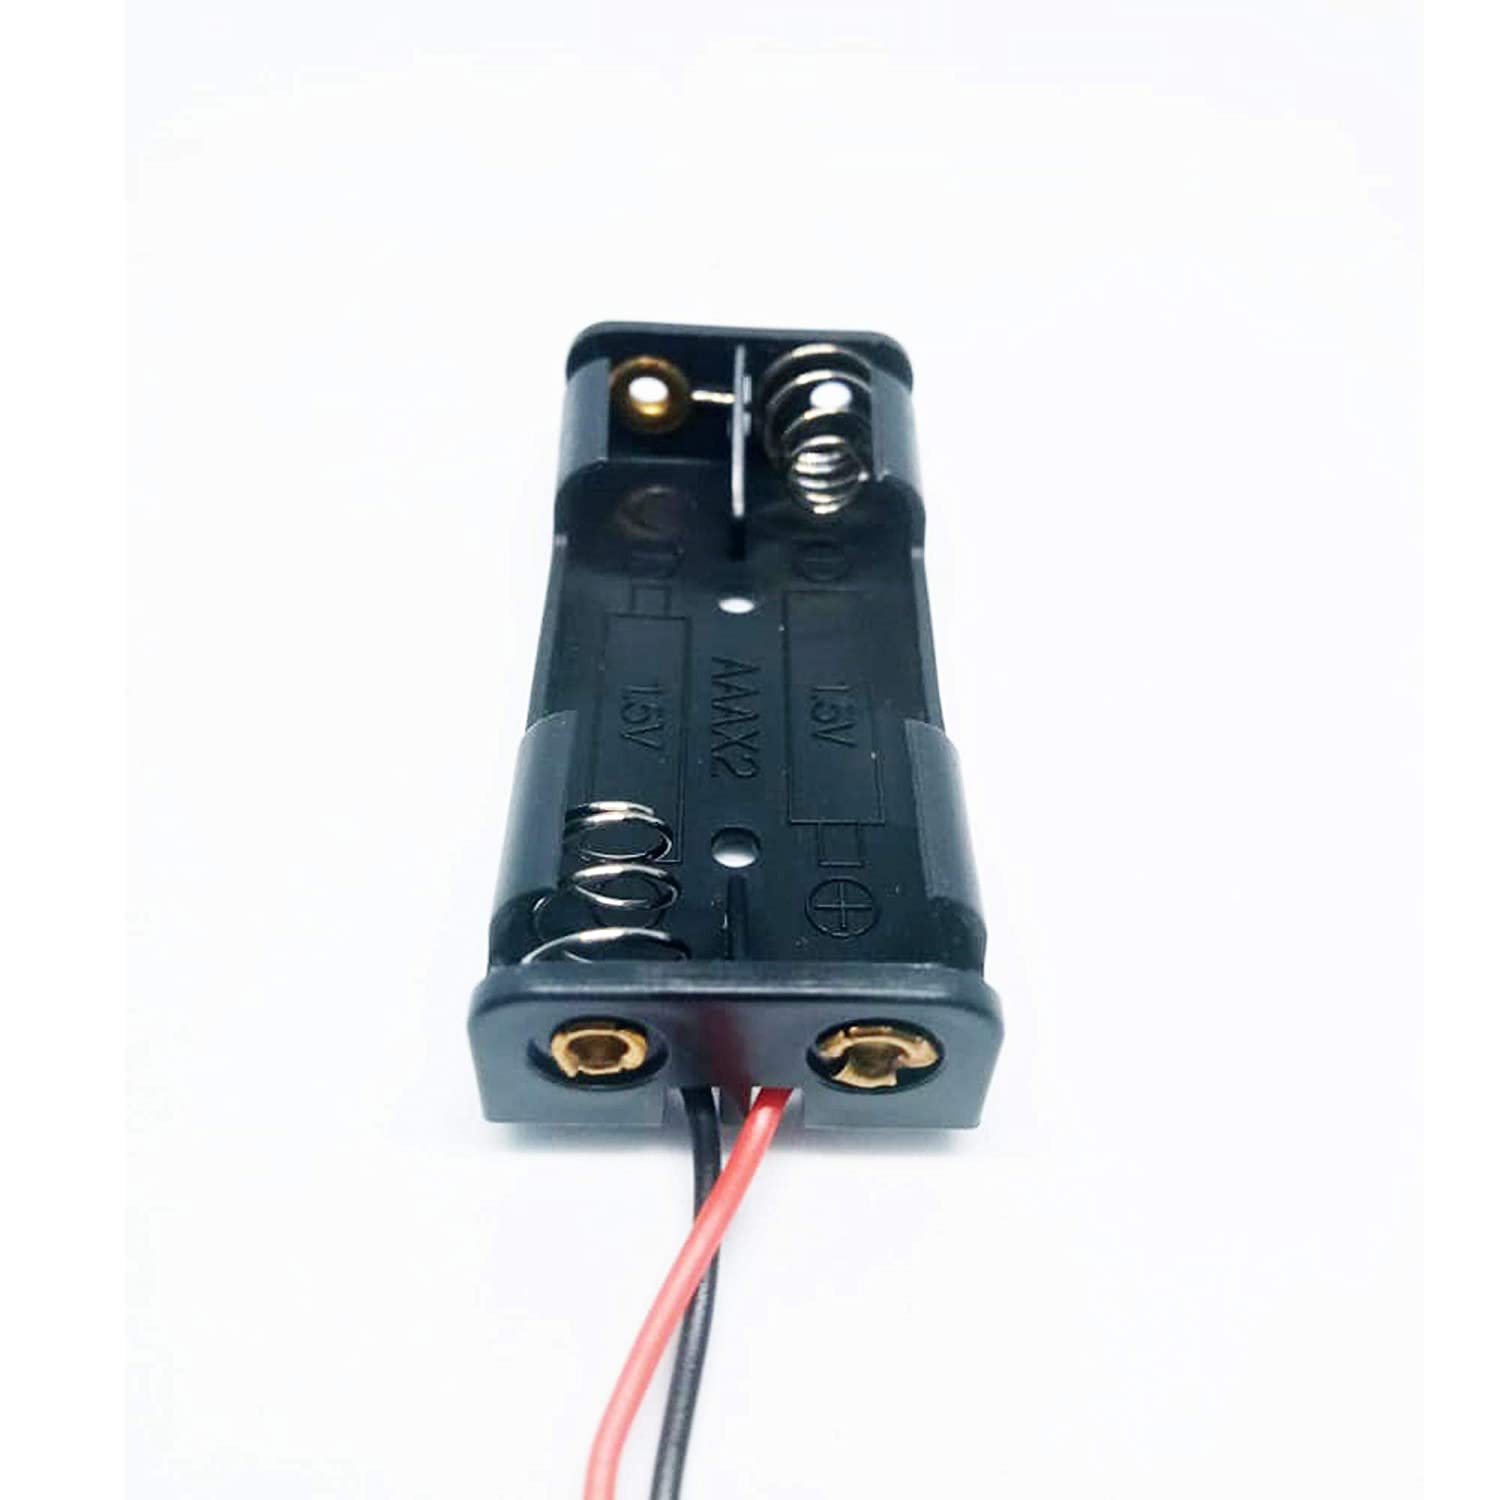 2 x AAA 1.5v battery holder without cover